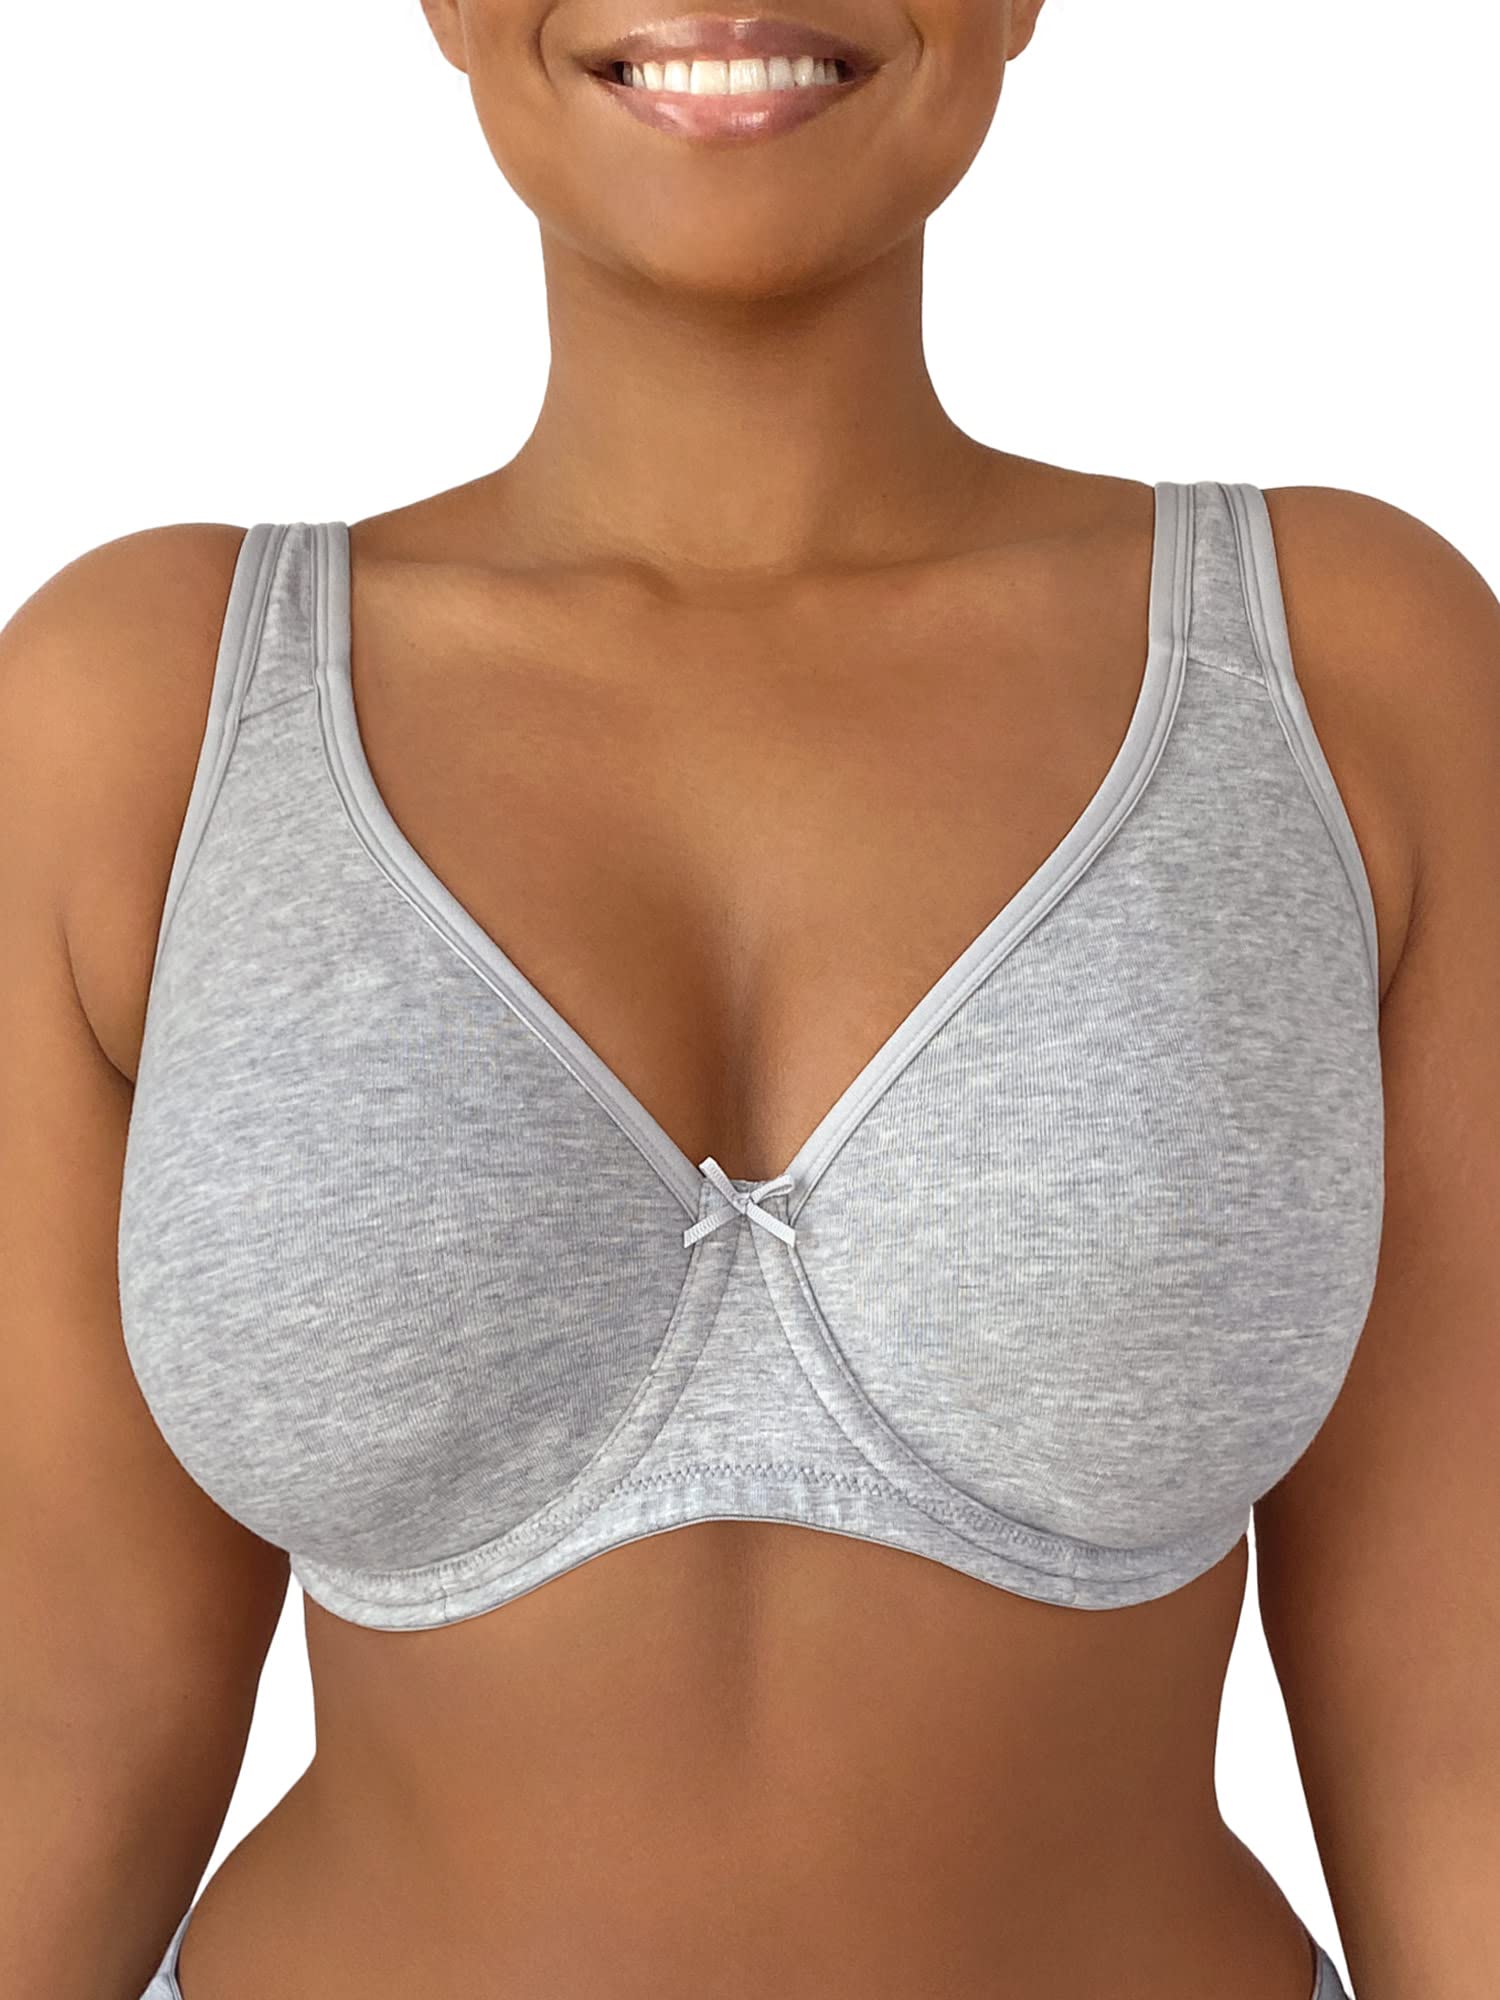 Fruit of the Loom Womens Plus-Size cotton Unlined Underwire Bra, Heather  grey, 46c